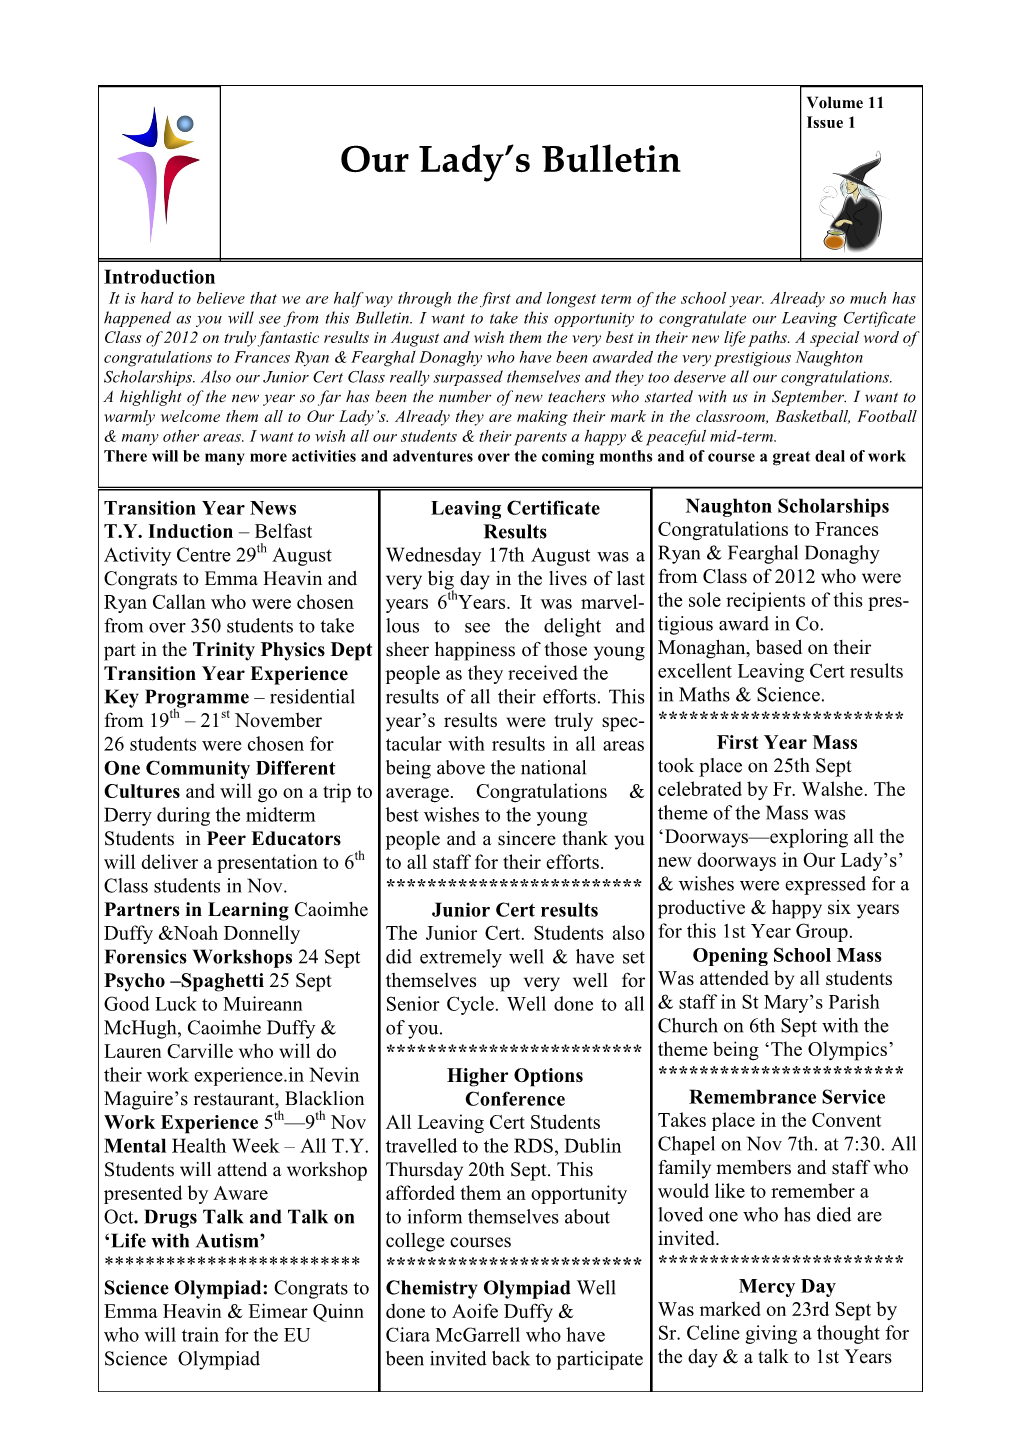 Our Lady's Bulletin